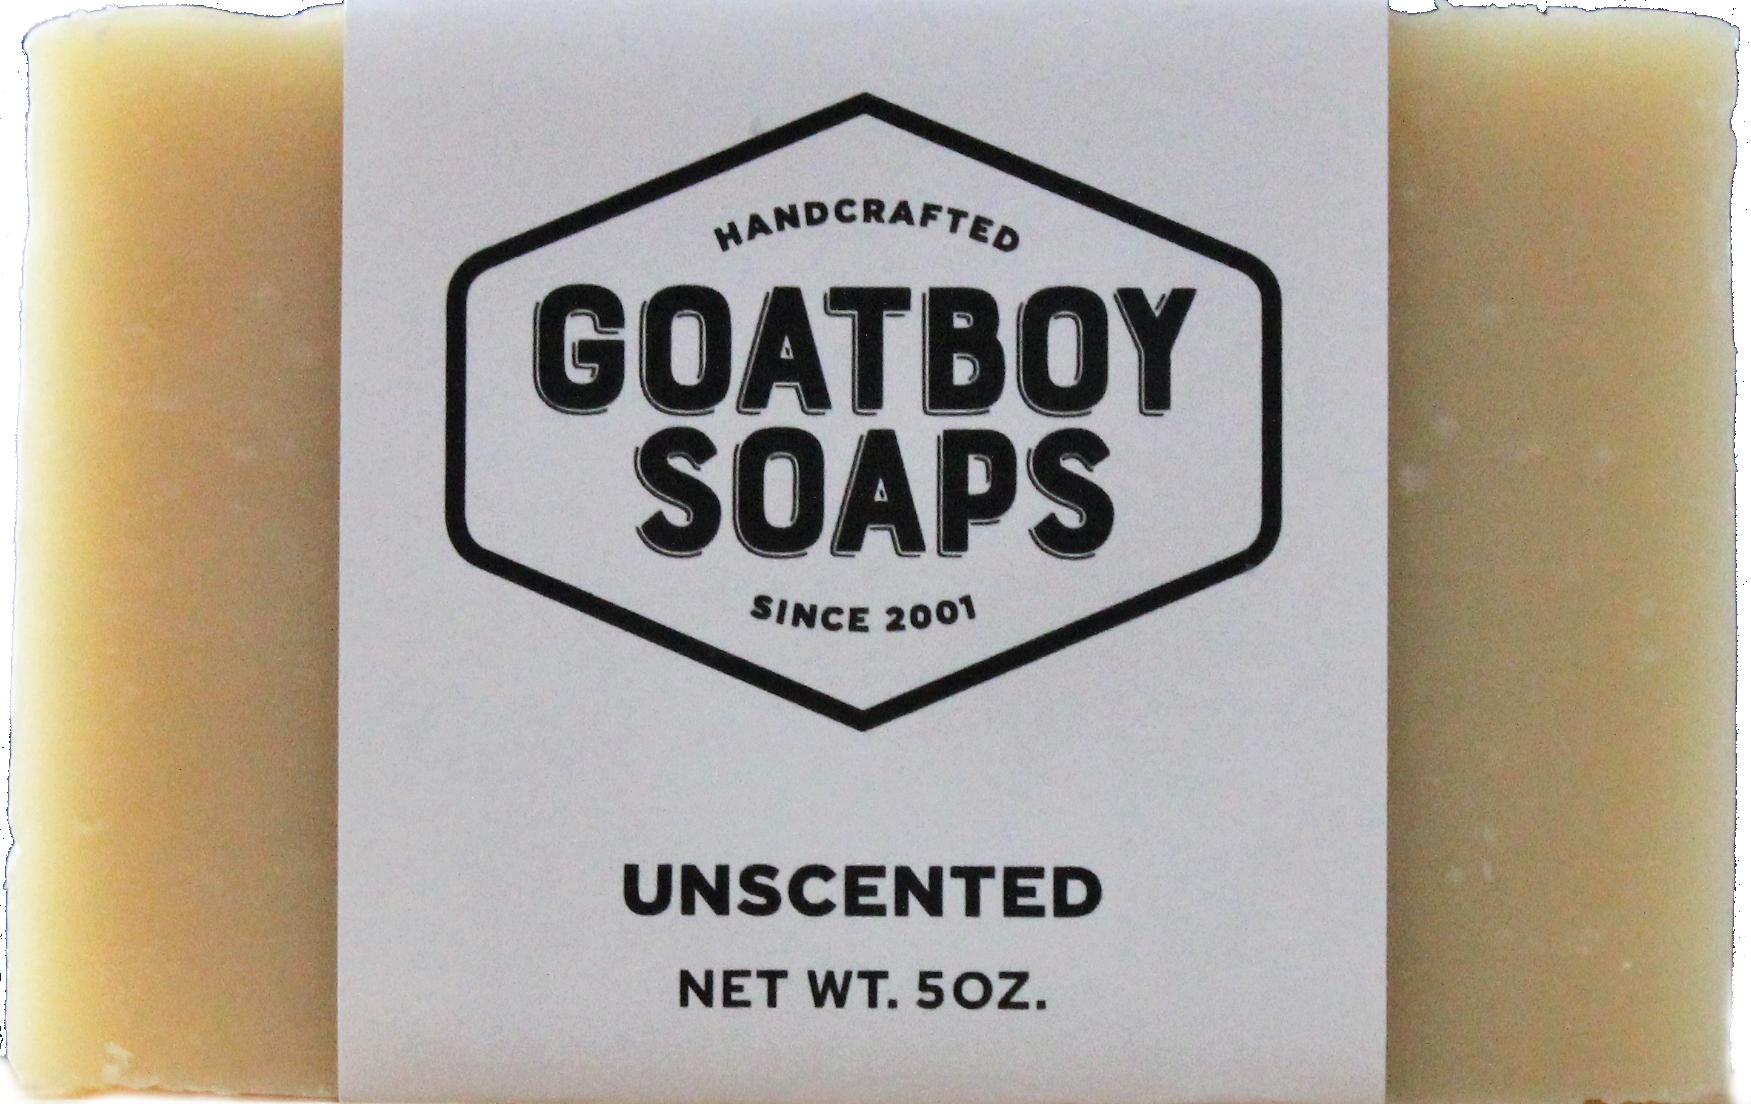 Unscented